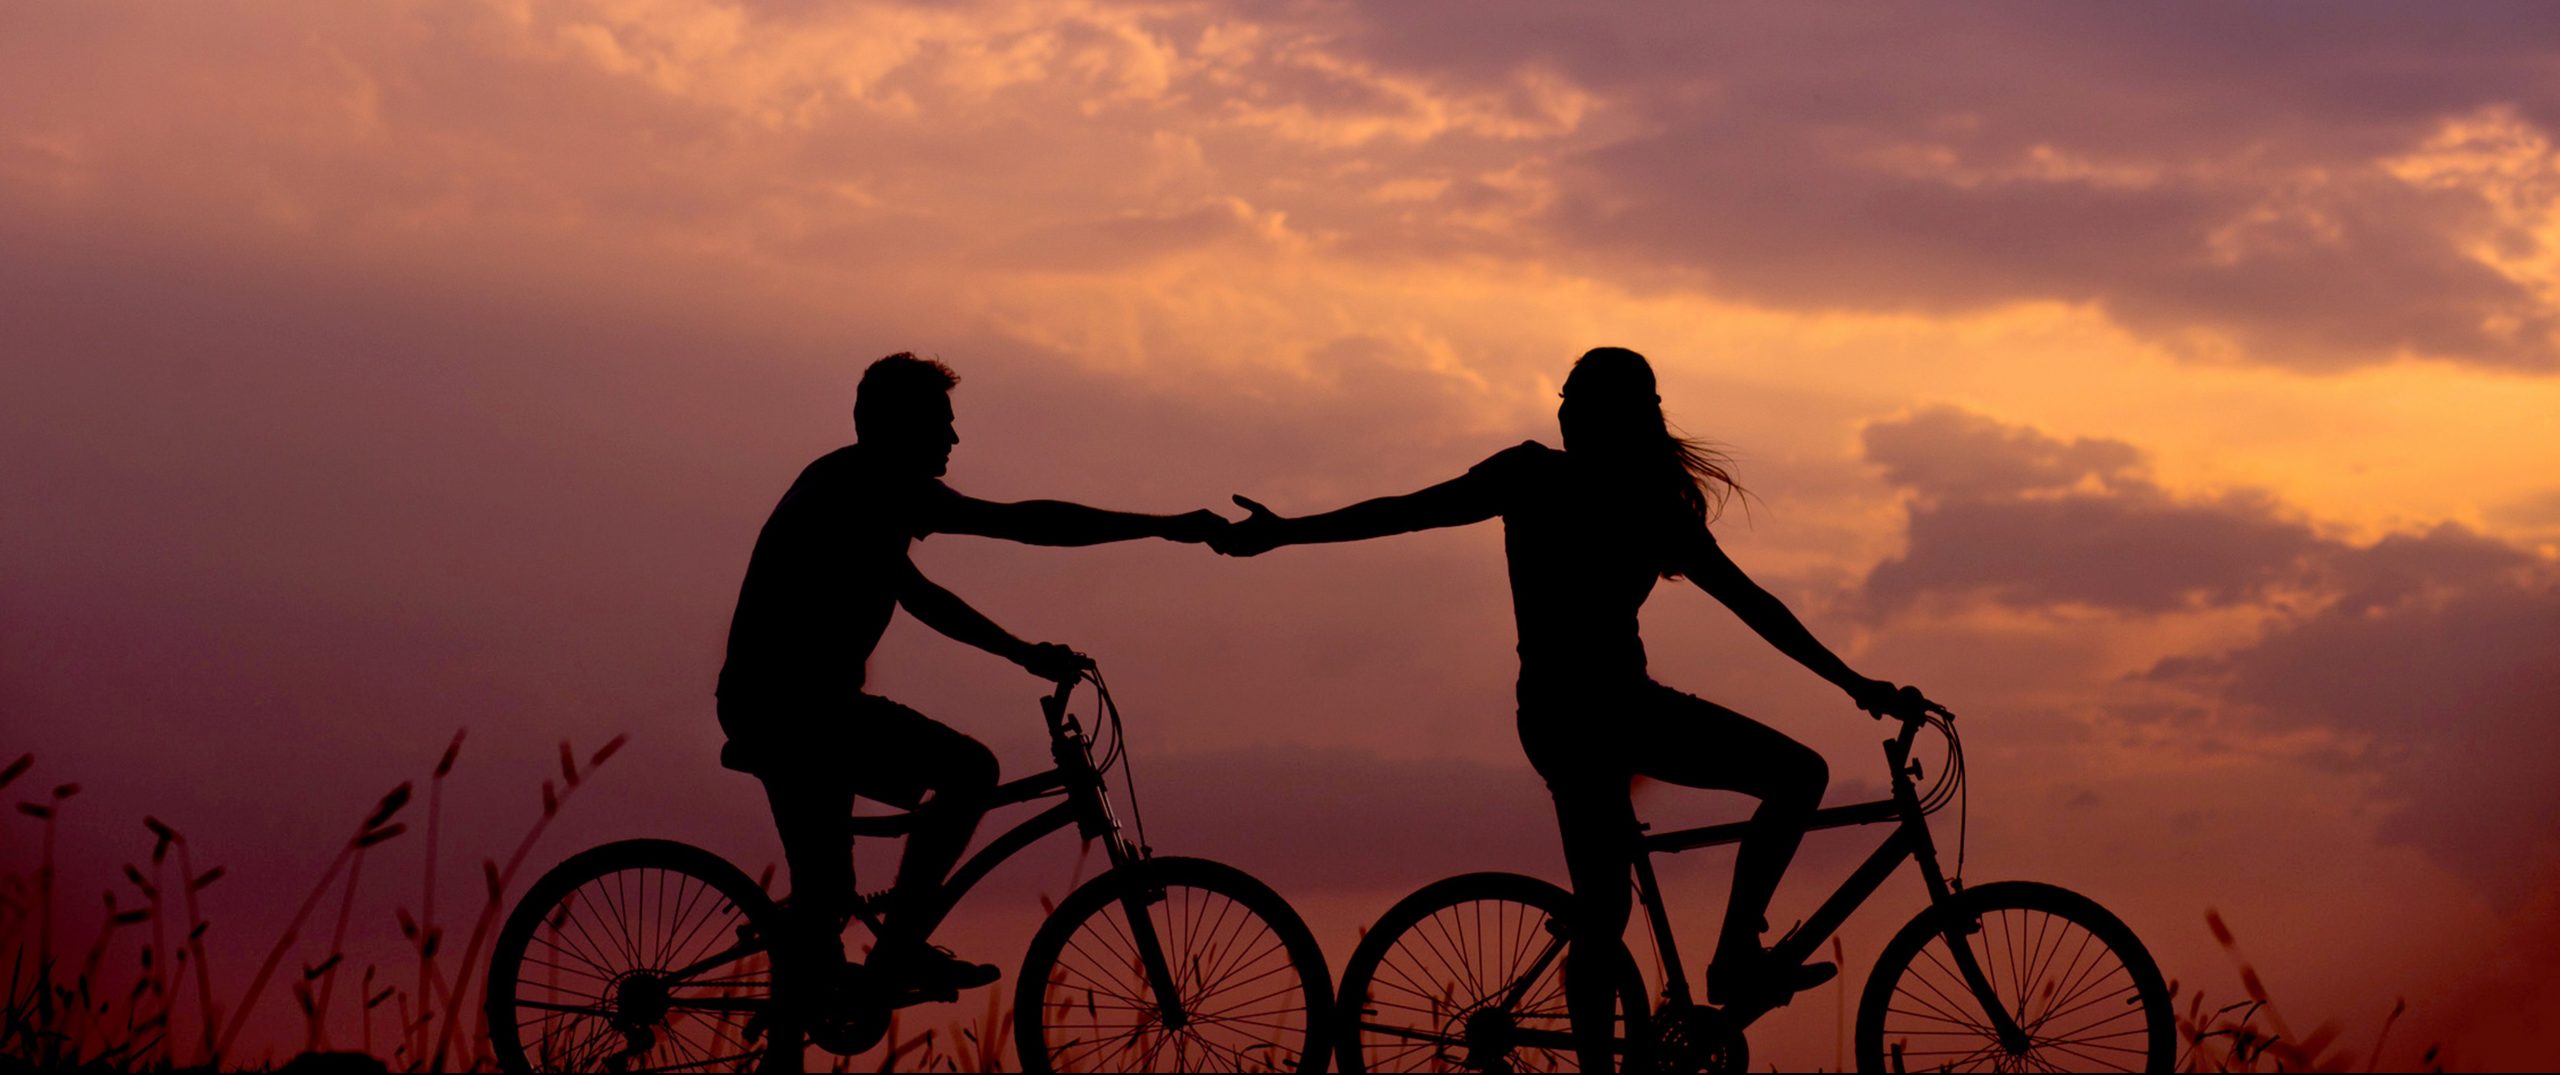 A photo of two people on bicycles against a cloudy sunset sky